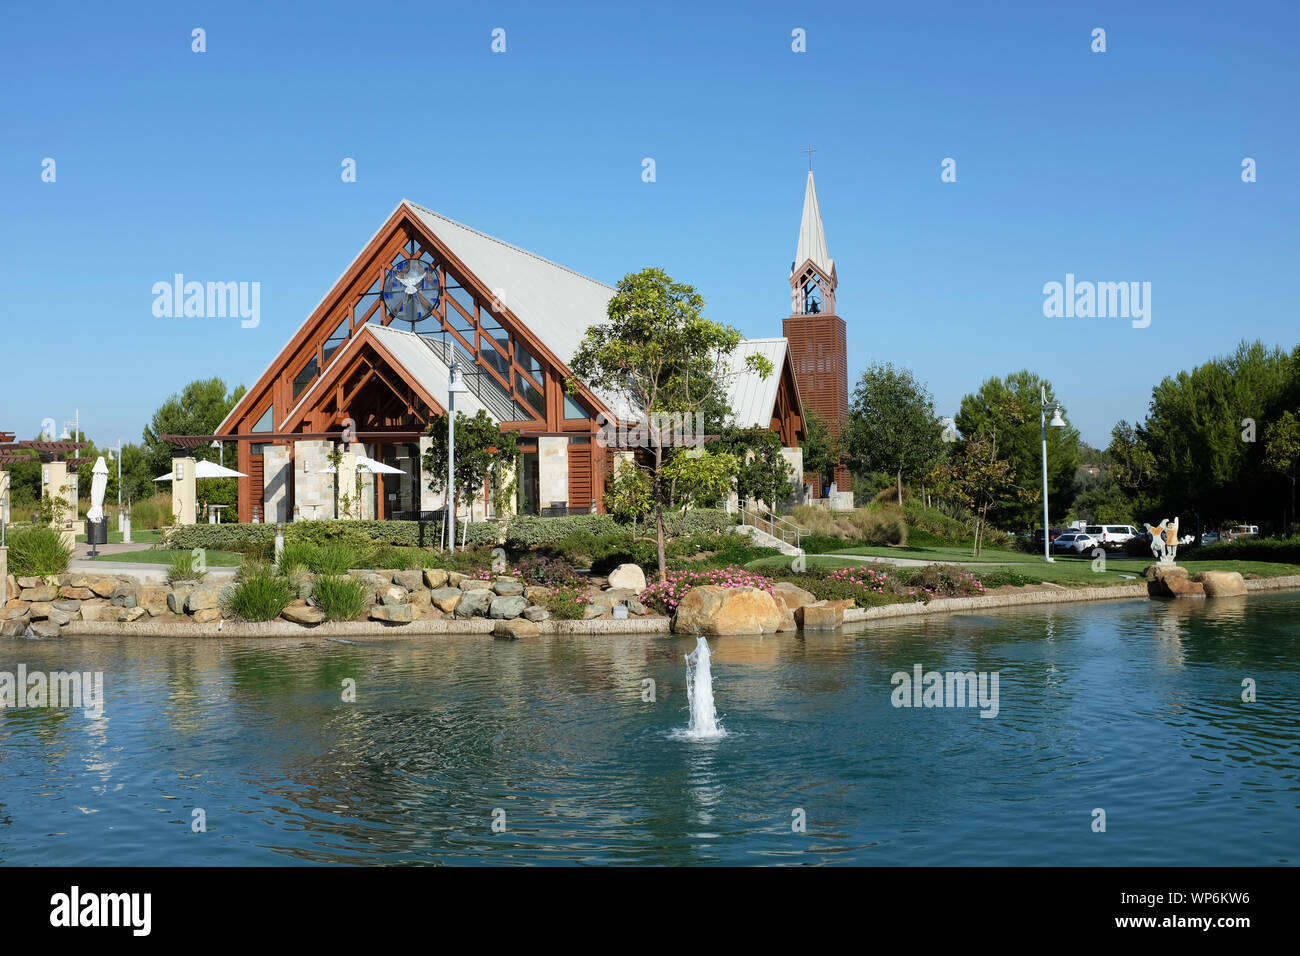 IRVINE, CALIFORNIA - SEPT 7, 2019: Mariners Church Chapel and lake, a non-denominational, Christian Church located in central Orange County. Stock Photo